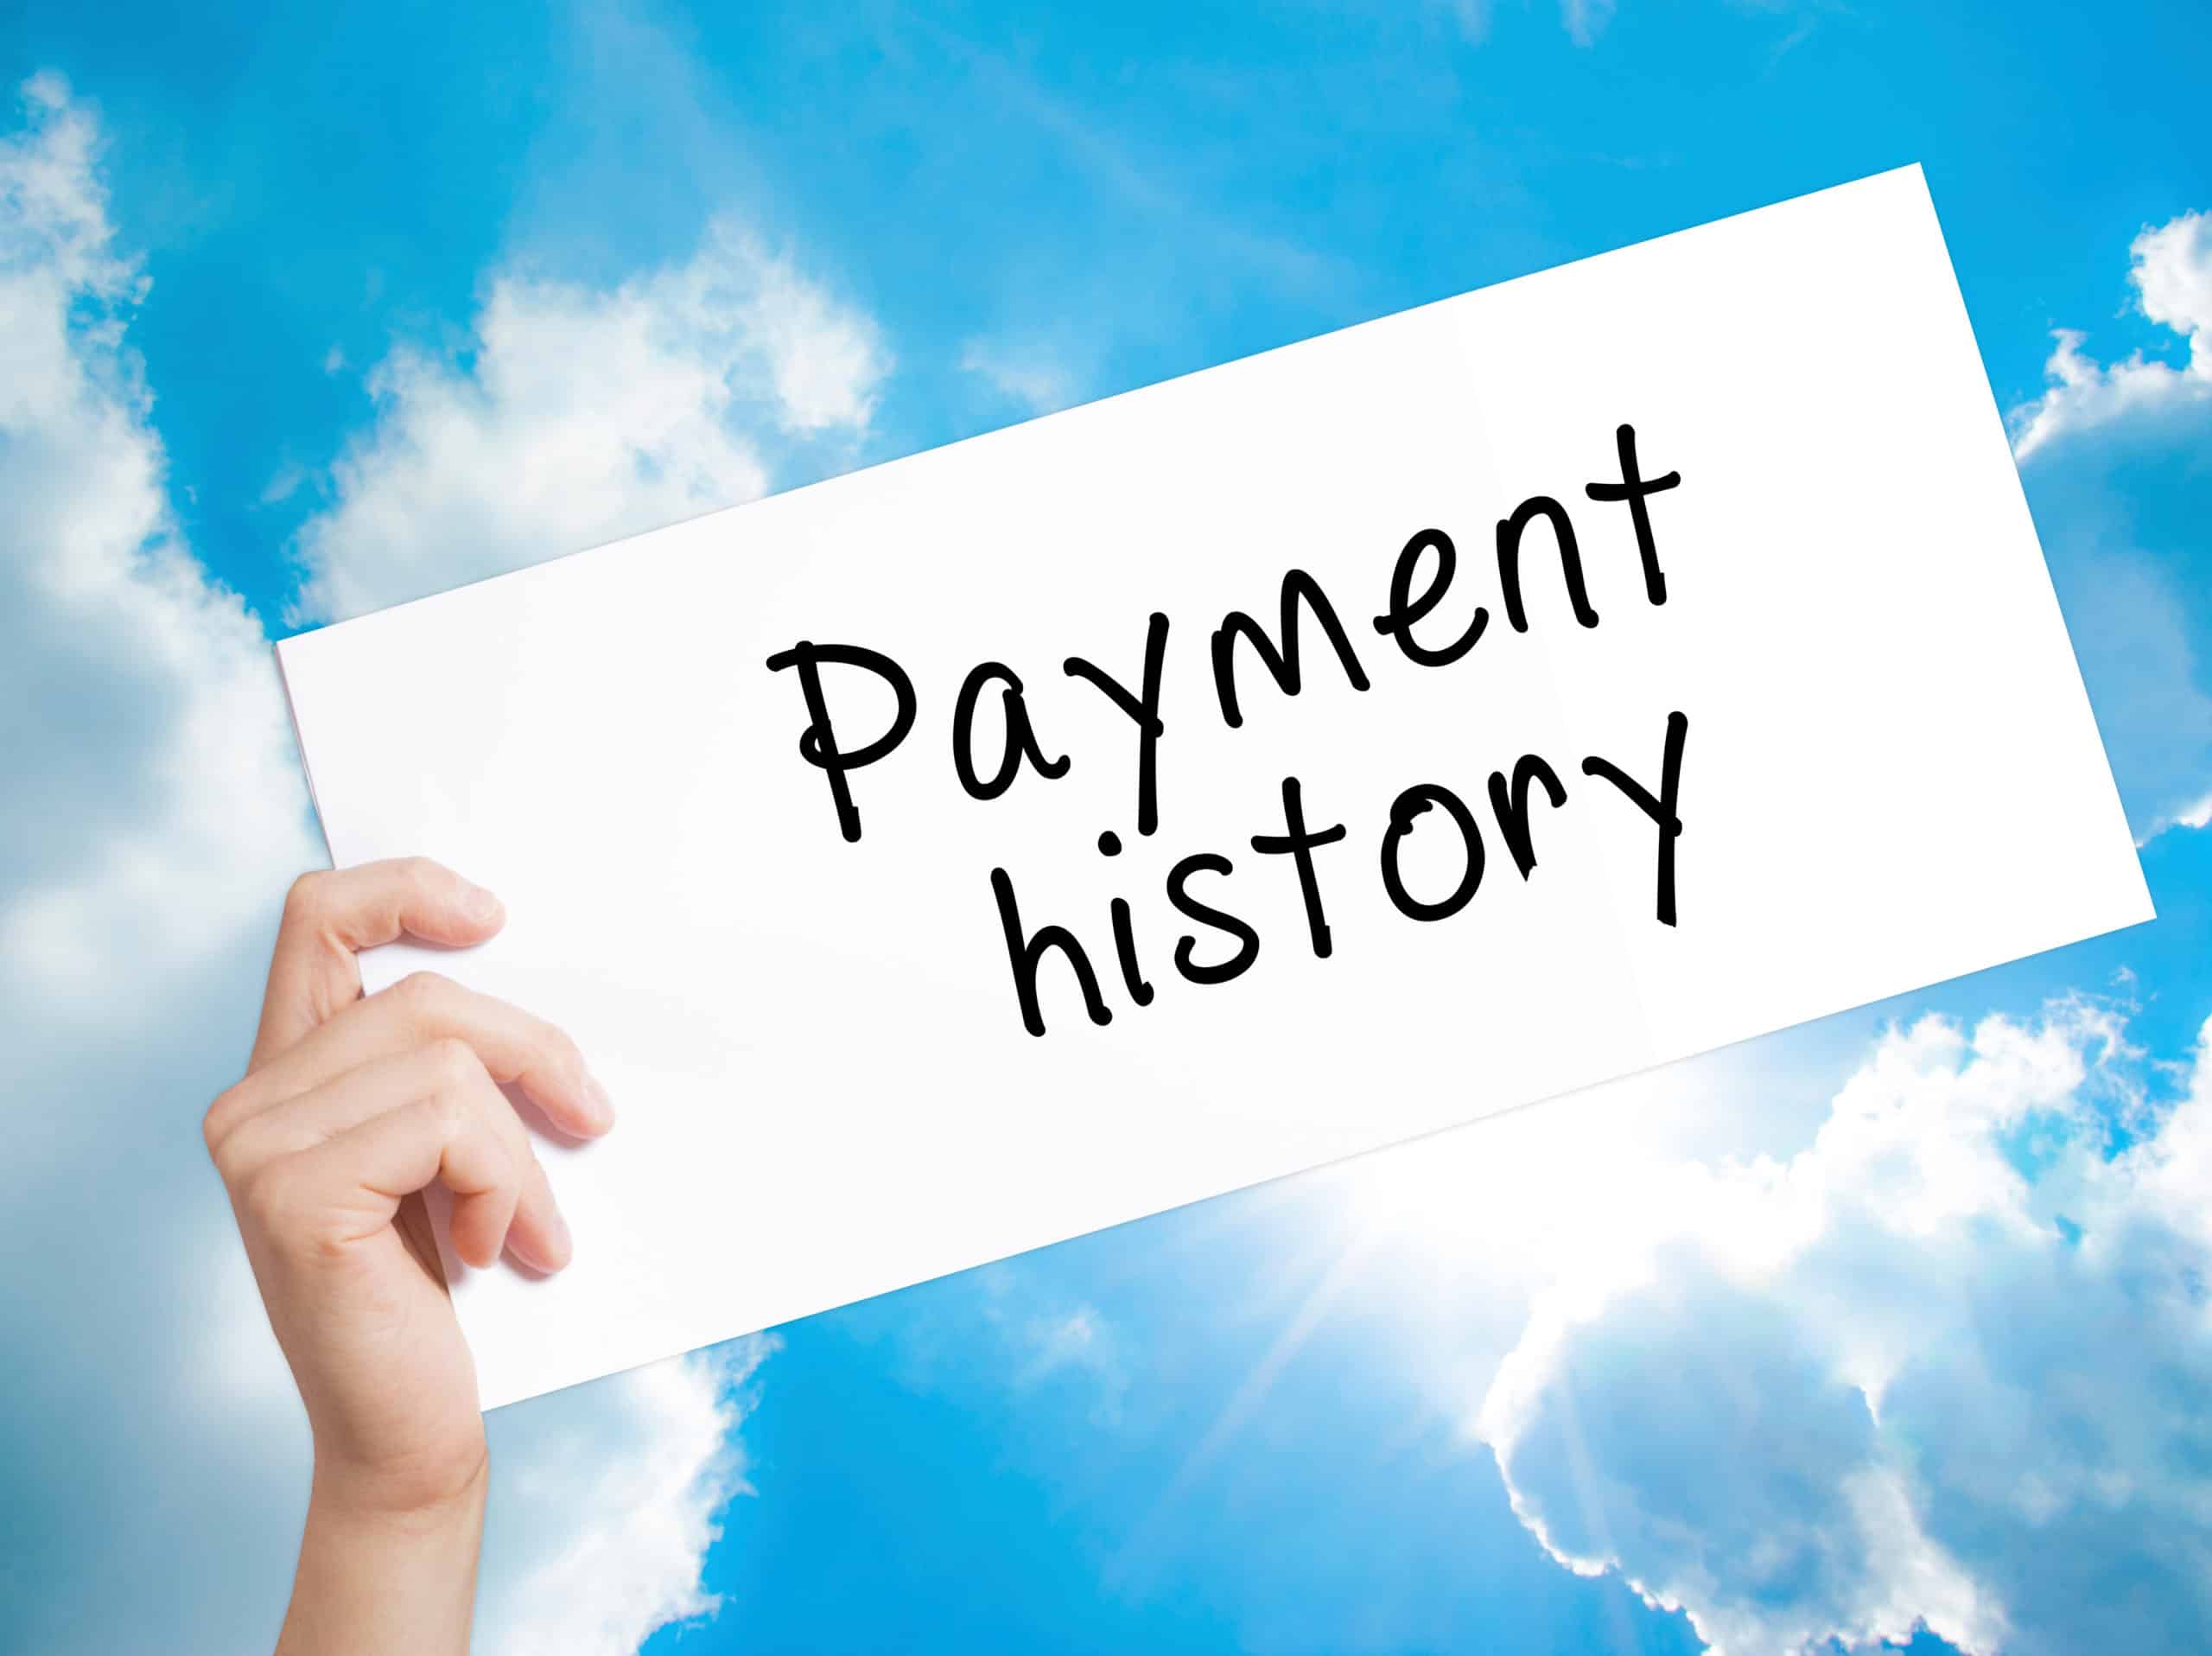 Payment History Visualization - Financial Transactions Over Time